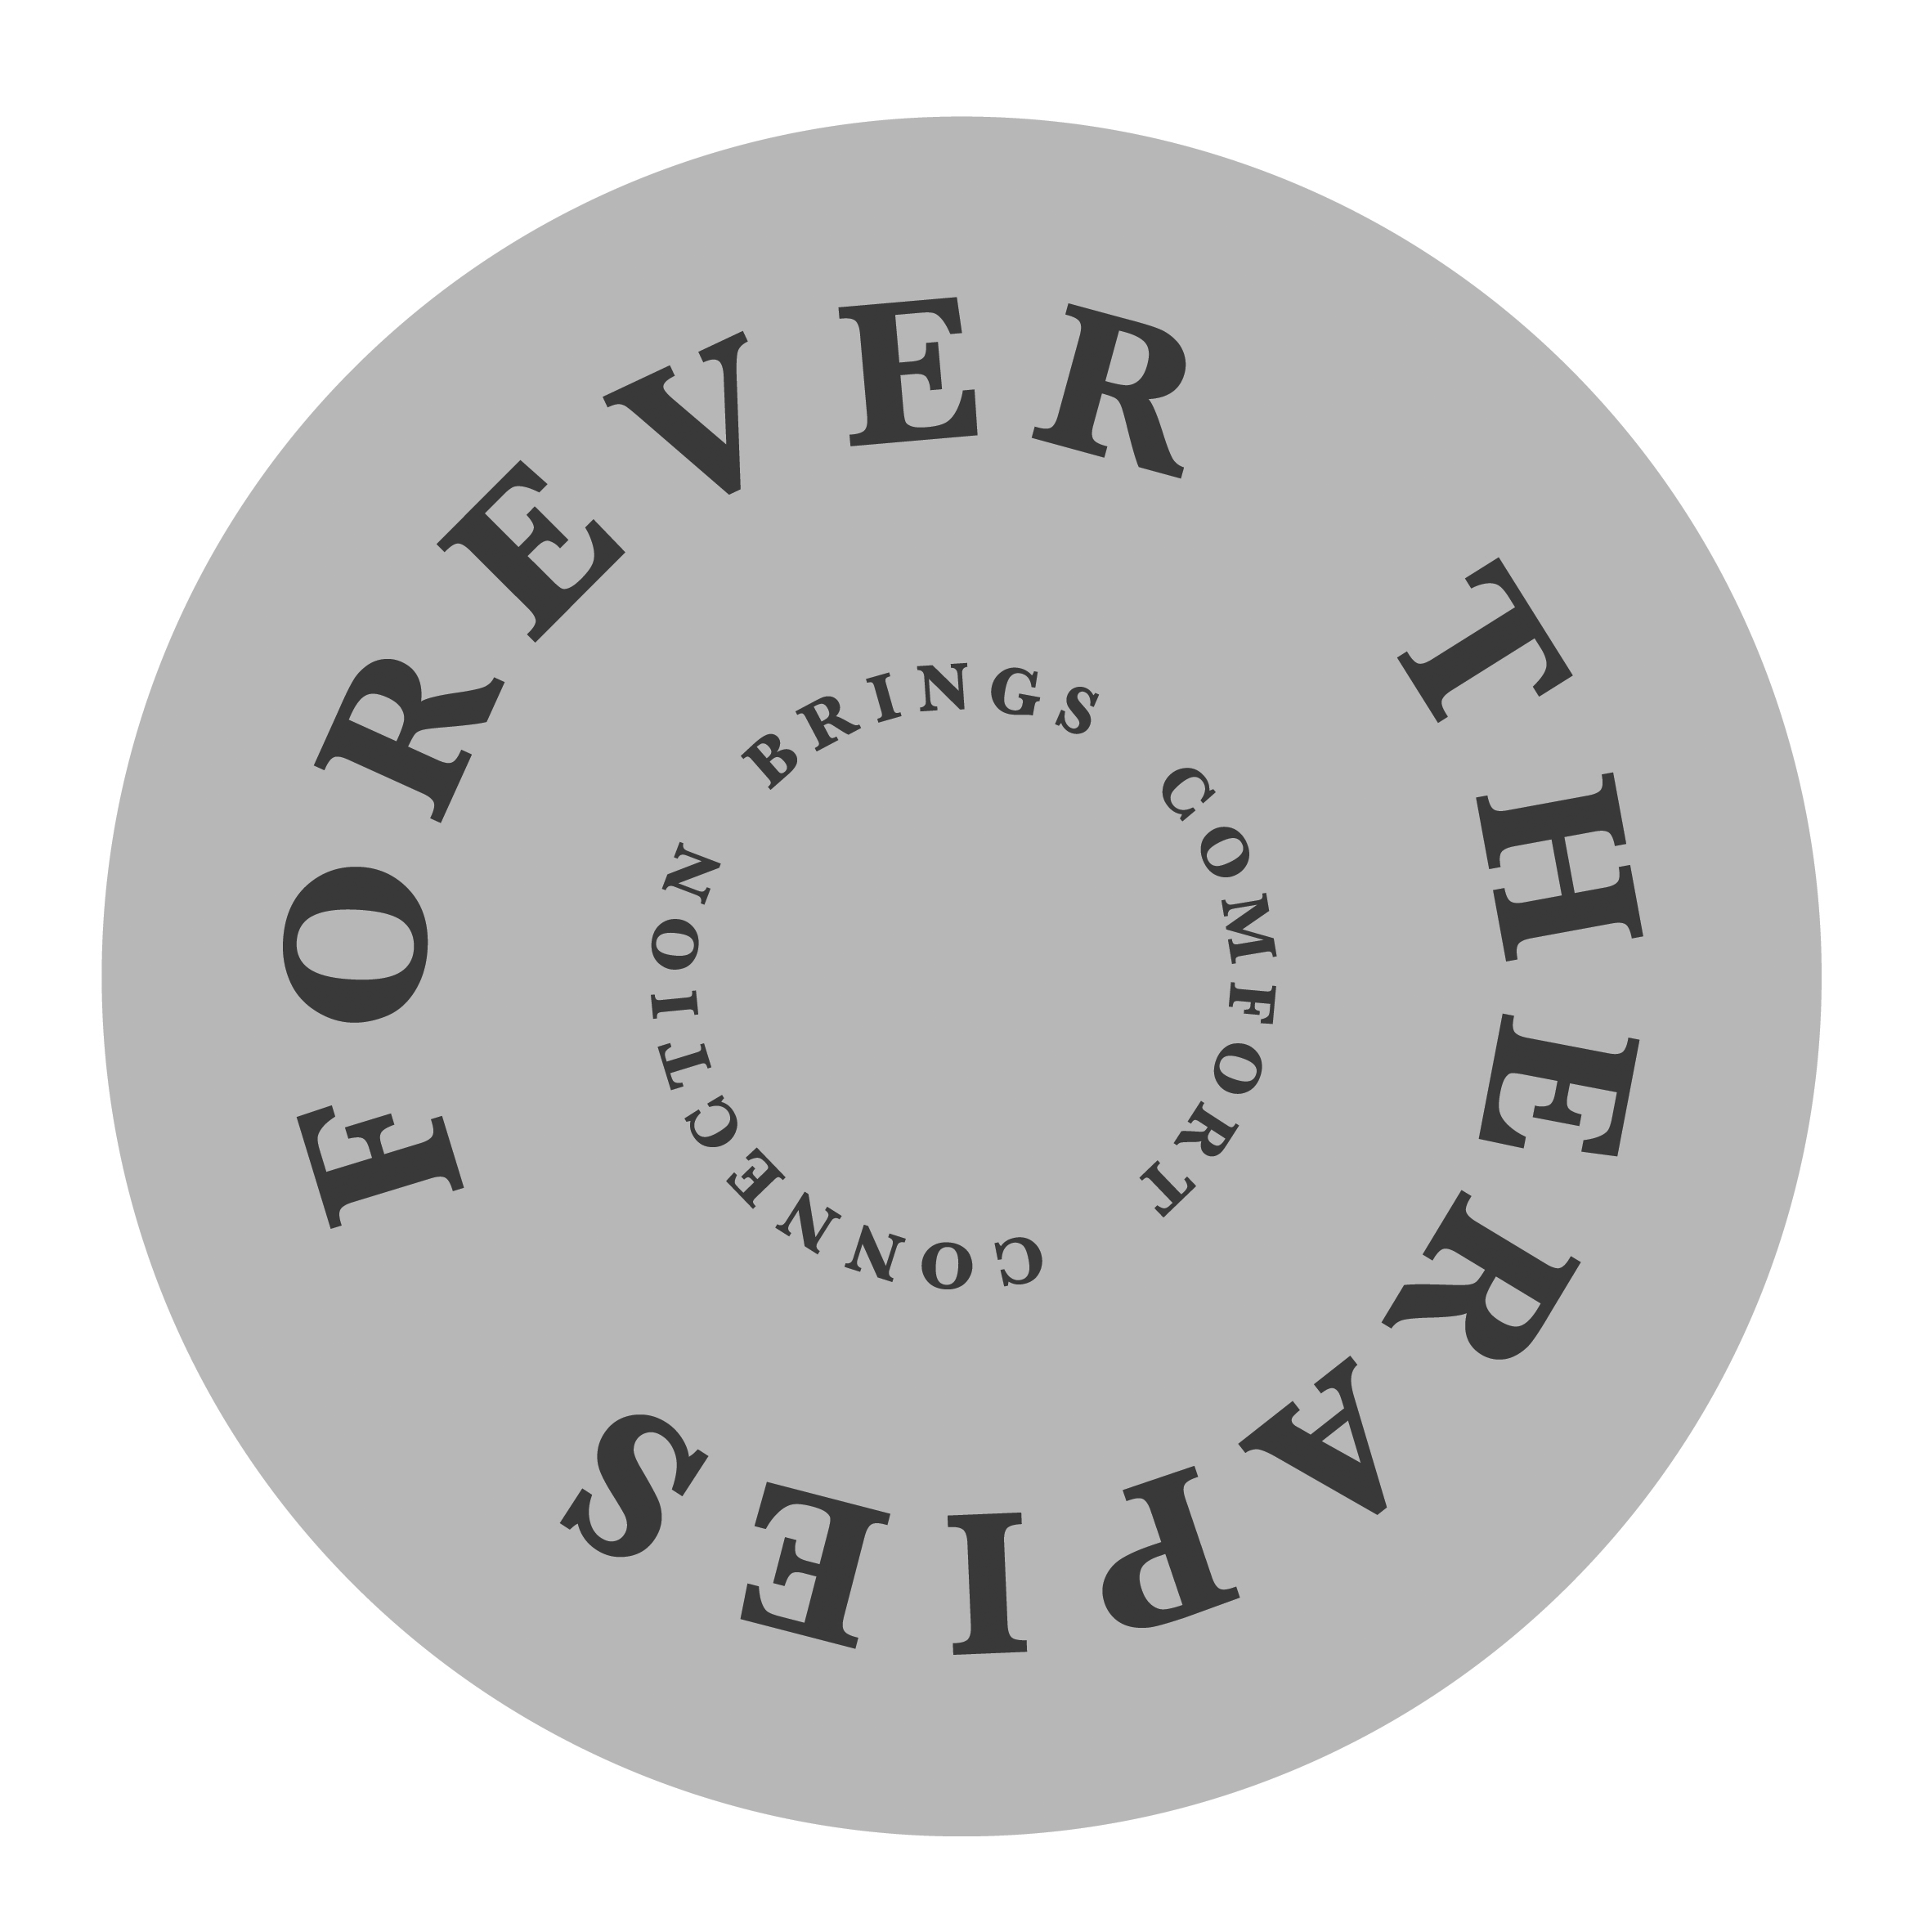 forever-therapies-1-1-1-1-1.png